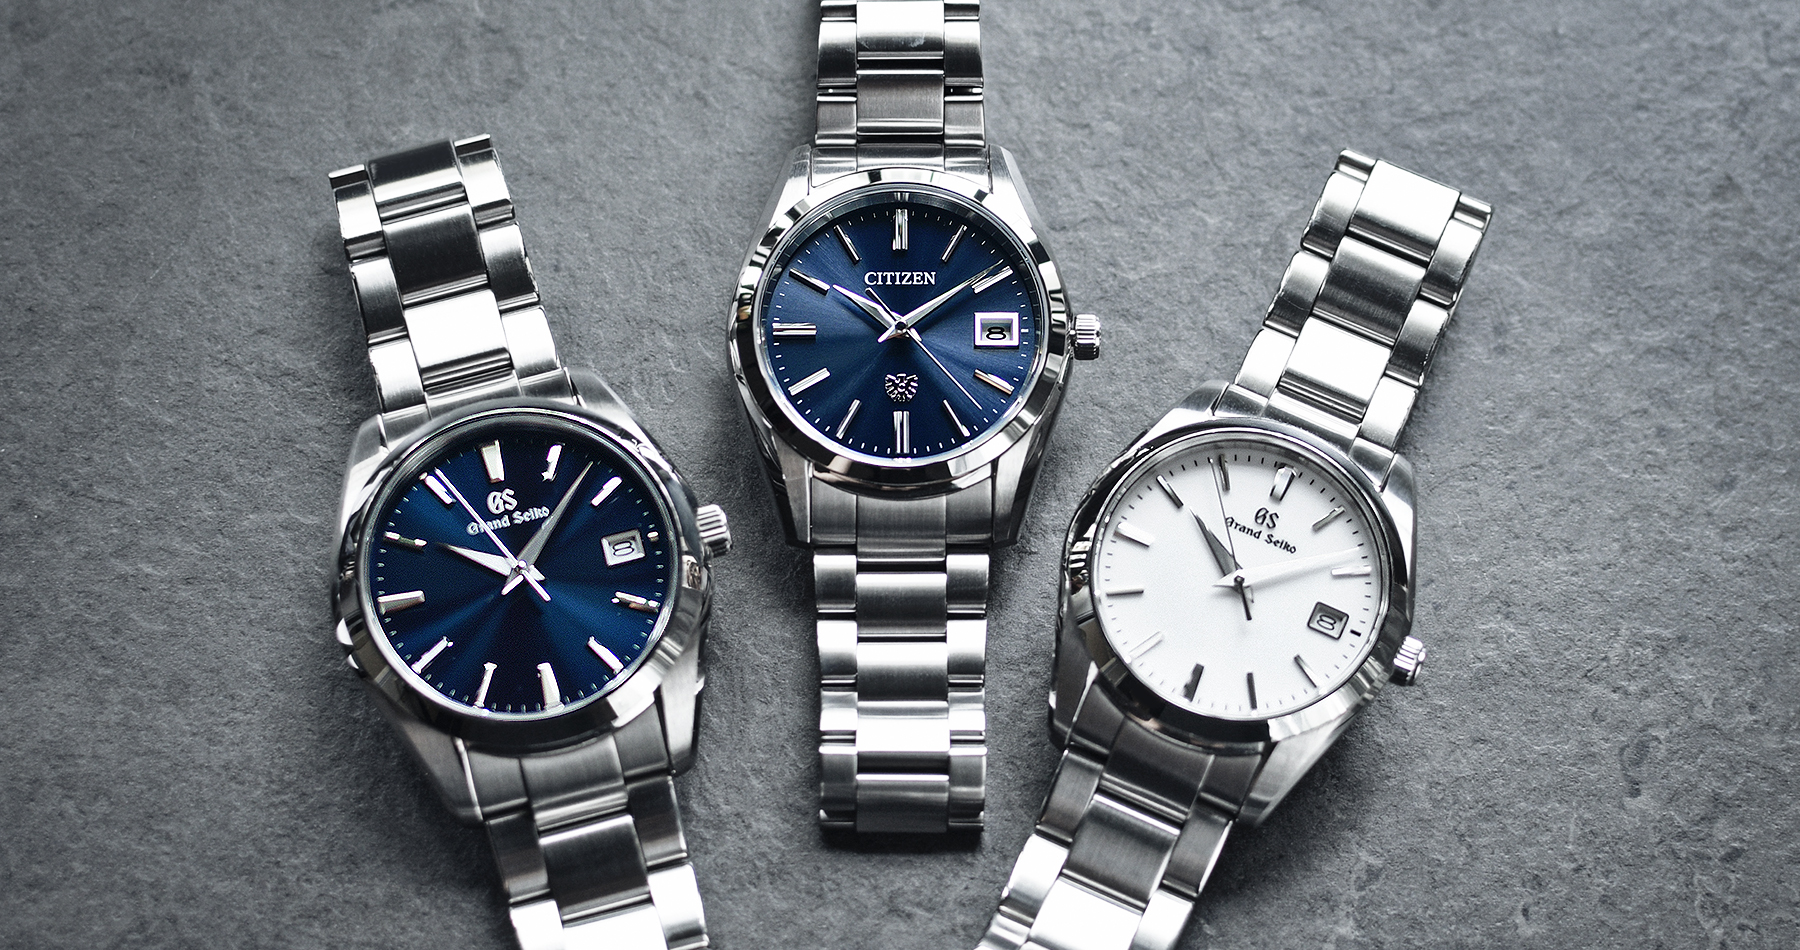 Citizen vs Seiko: Comparing the Leading Japanese Watch Brands